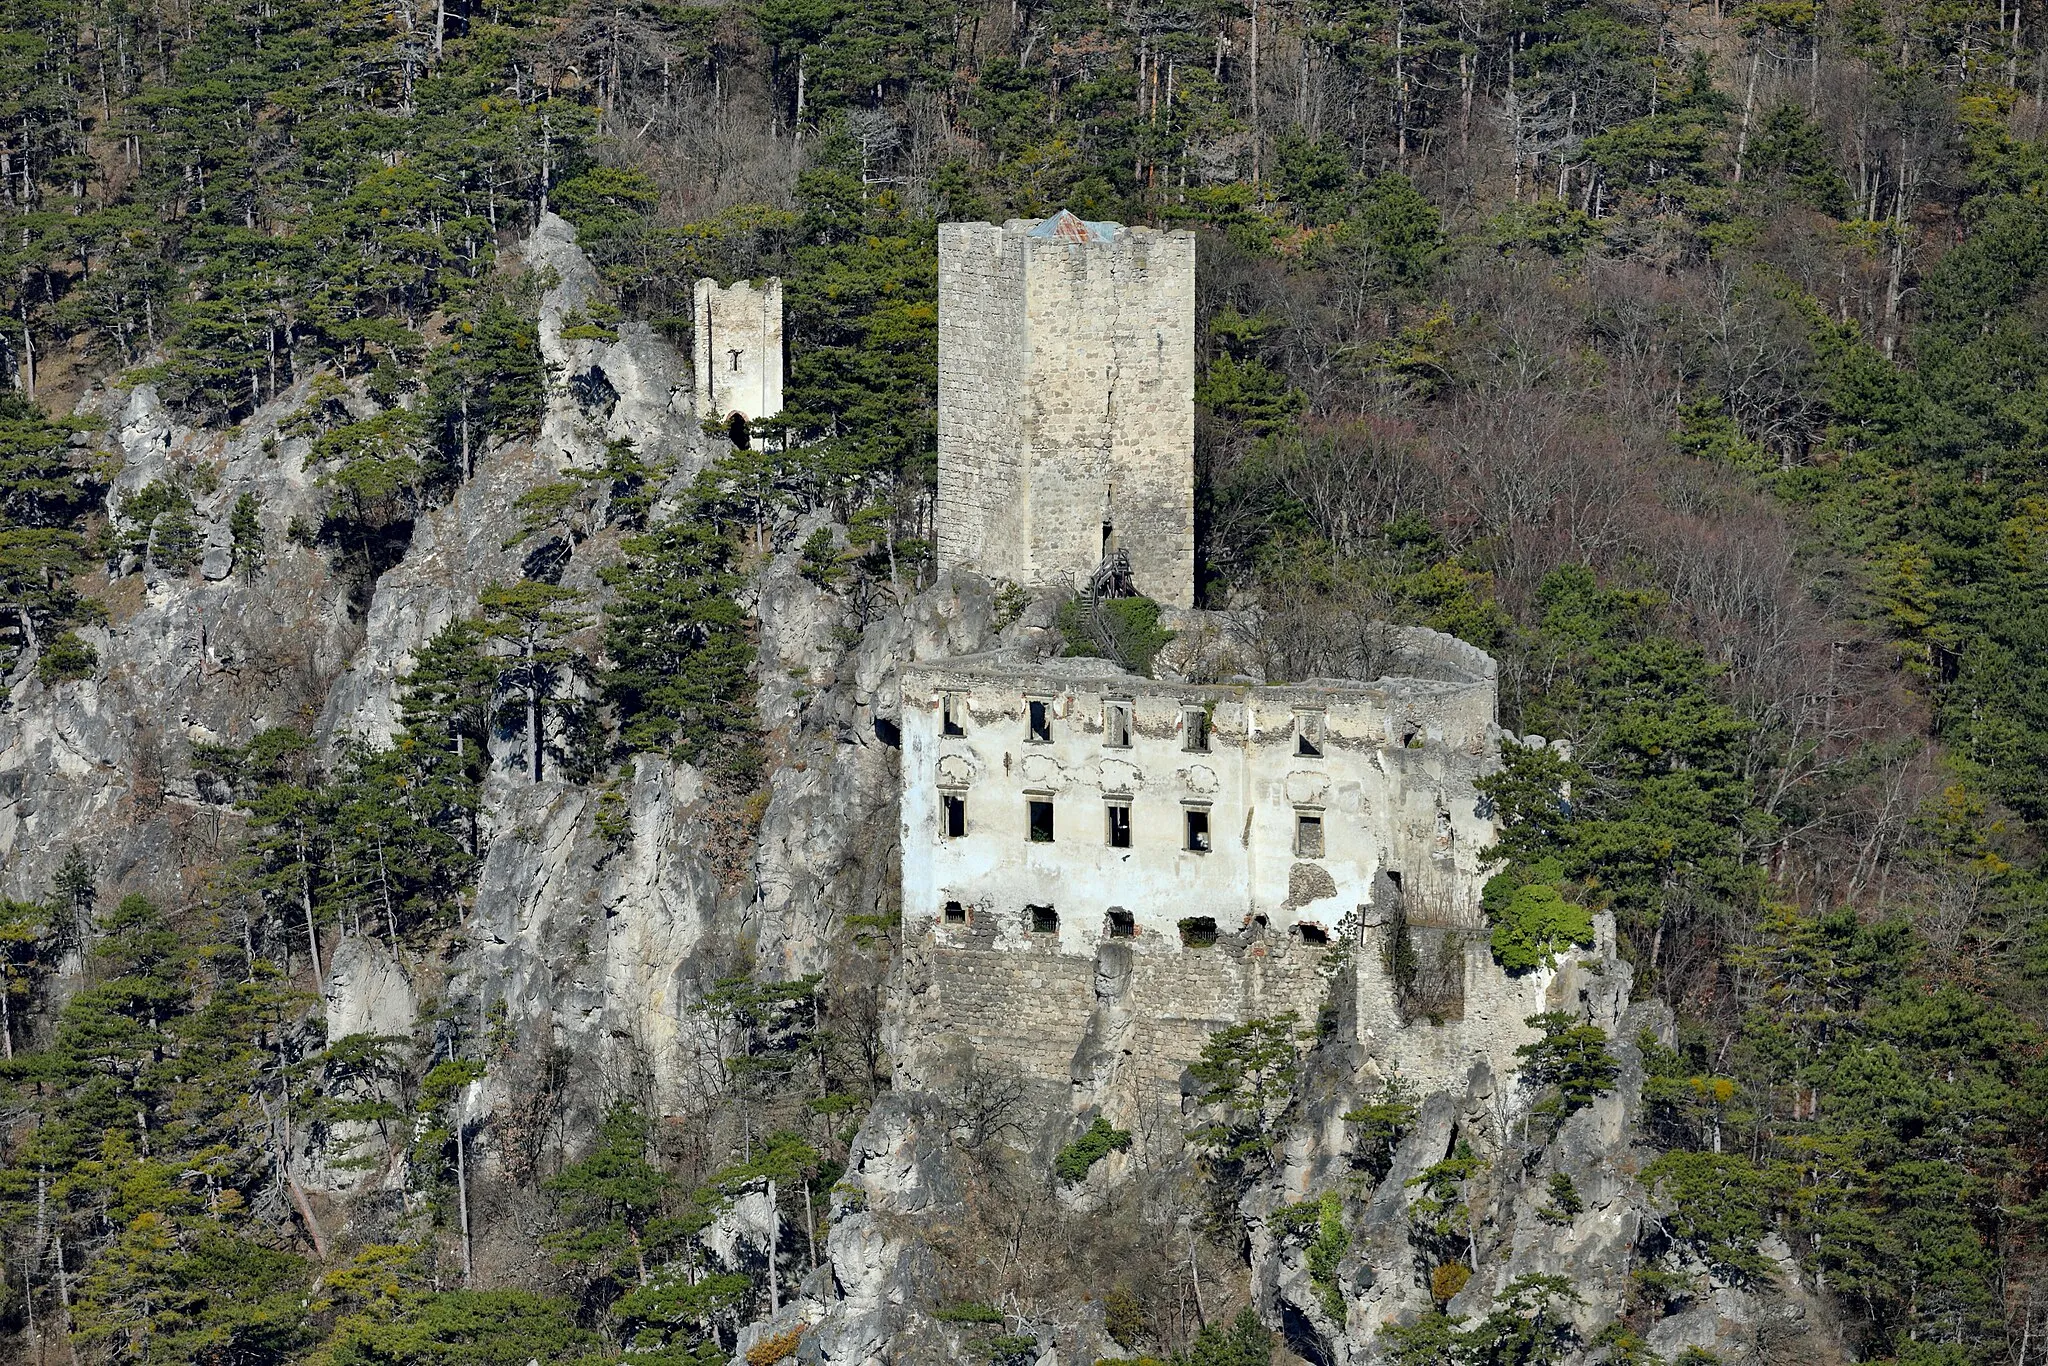 Photo showing: South view of the Rauhenstein castle ruins in Baden, Lower Austria.